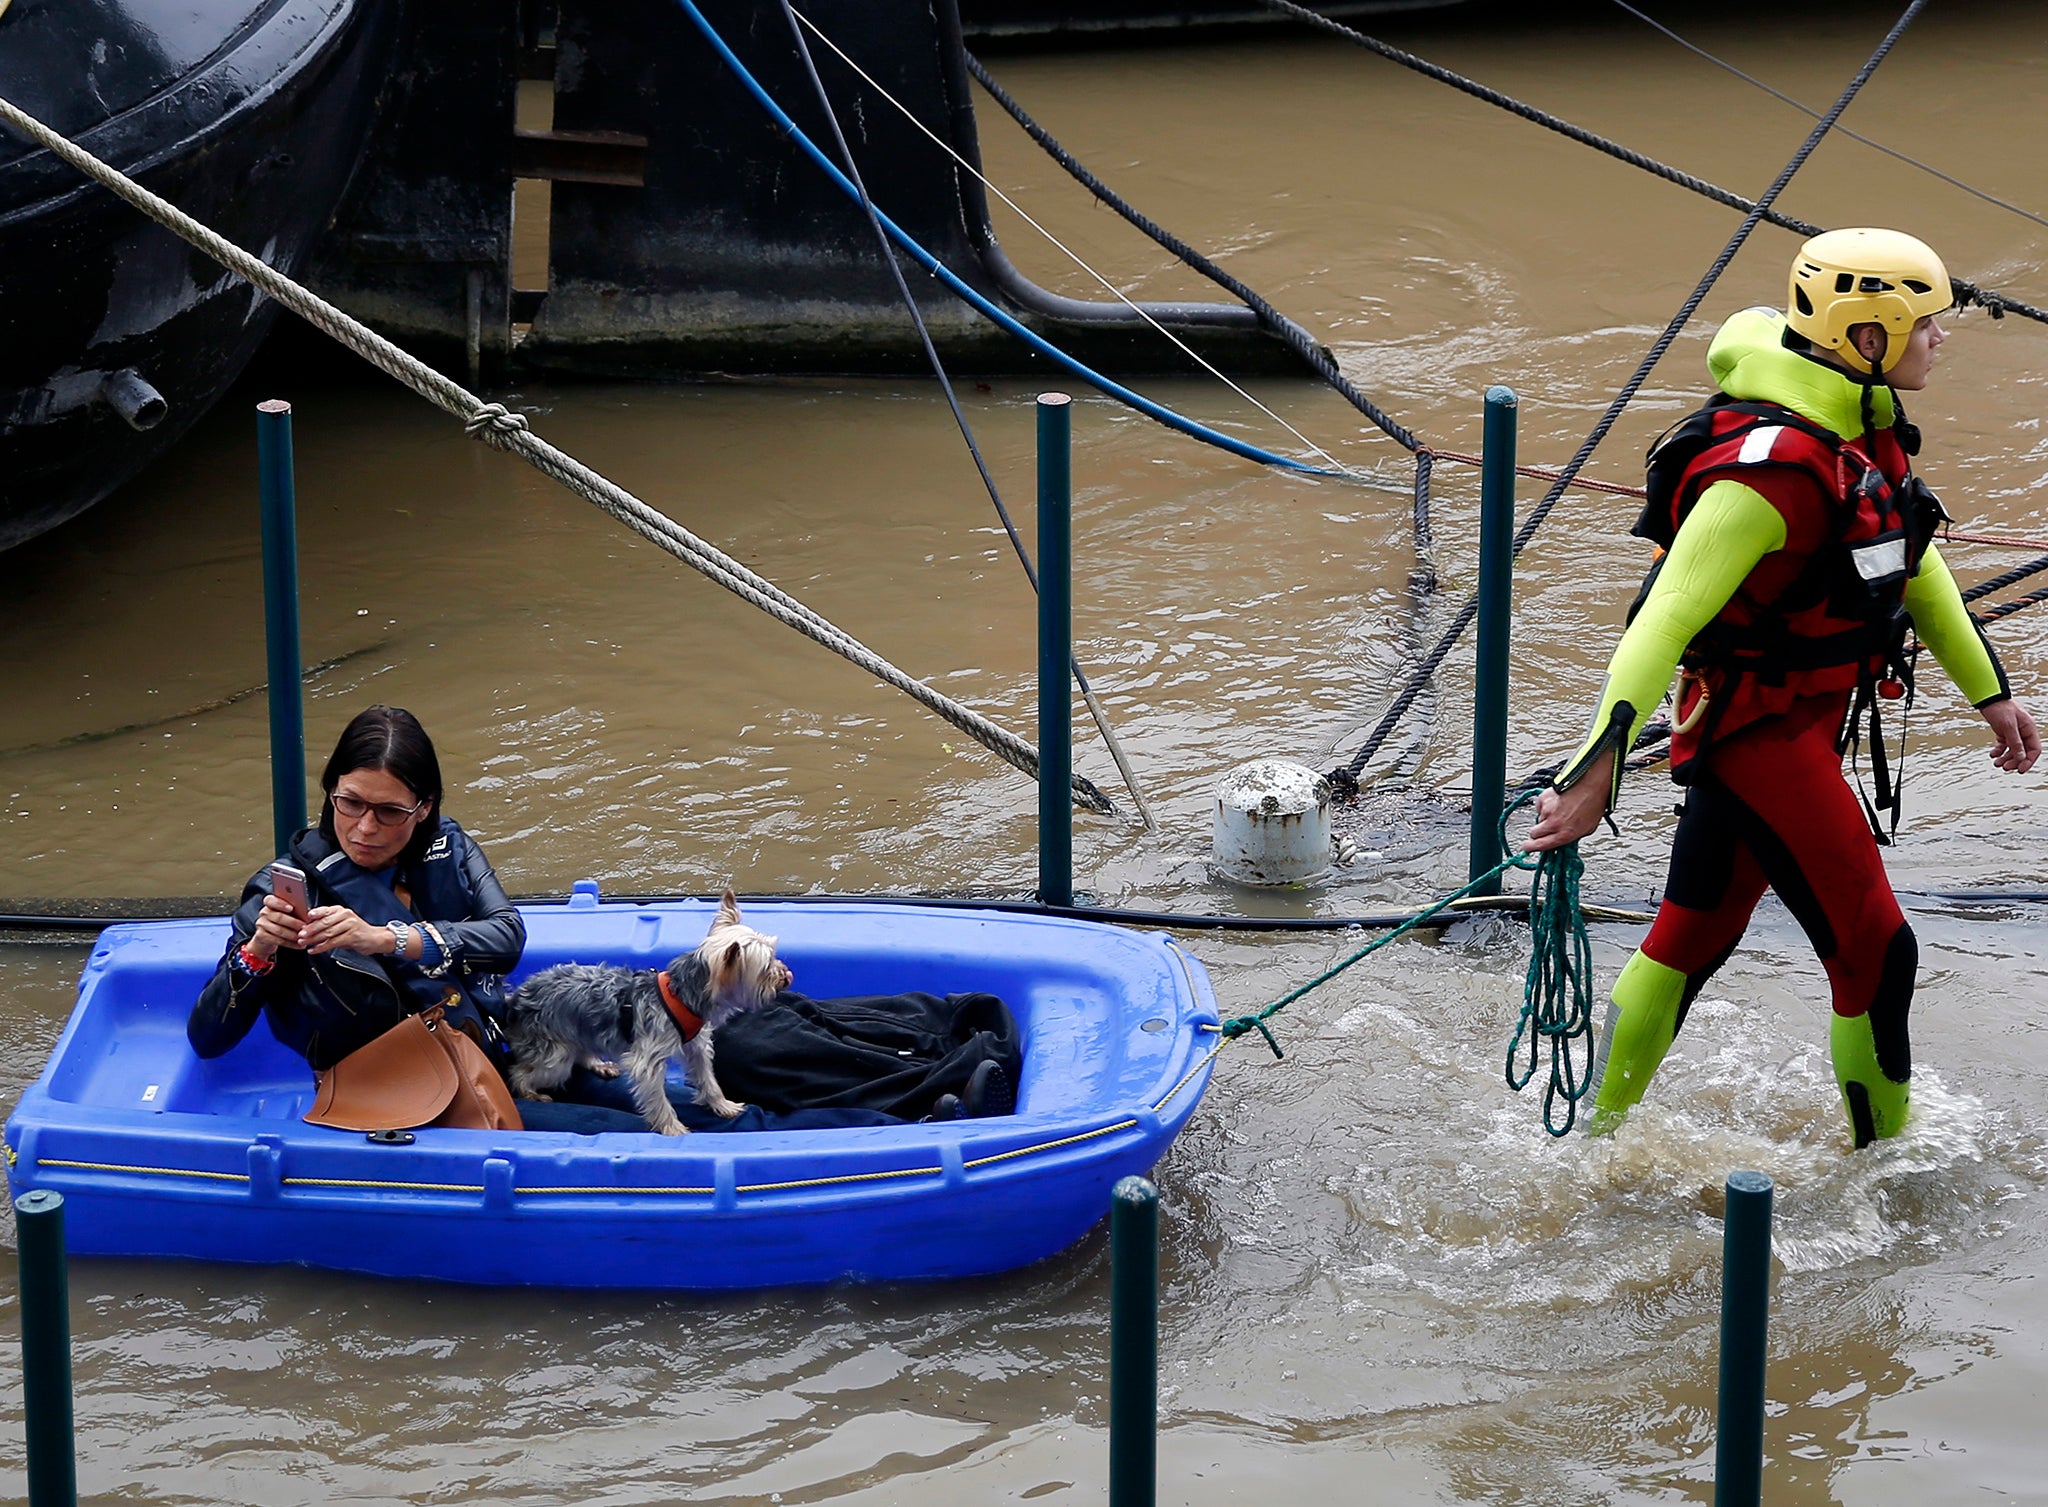 A 'flood crisis' centre has been launched in Paris to monitor the River Seine after the wettest recorded May since 1882